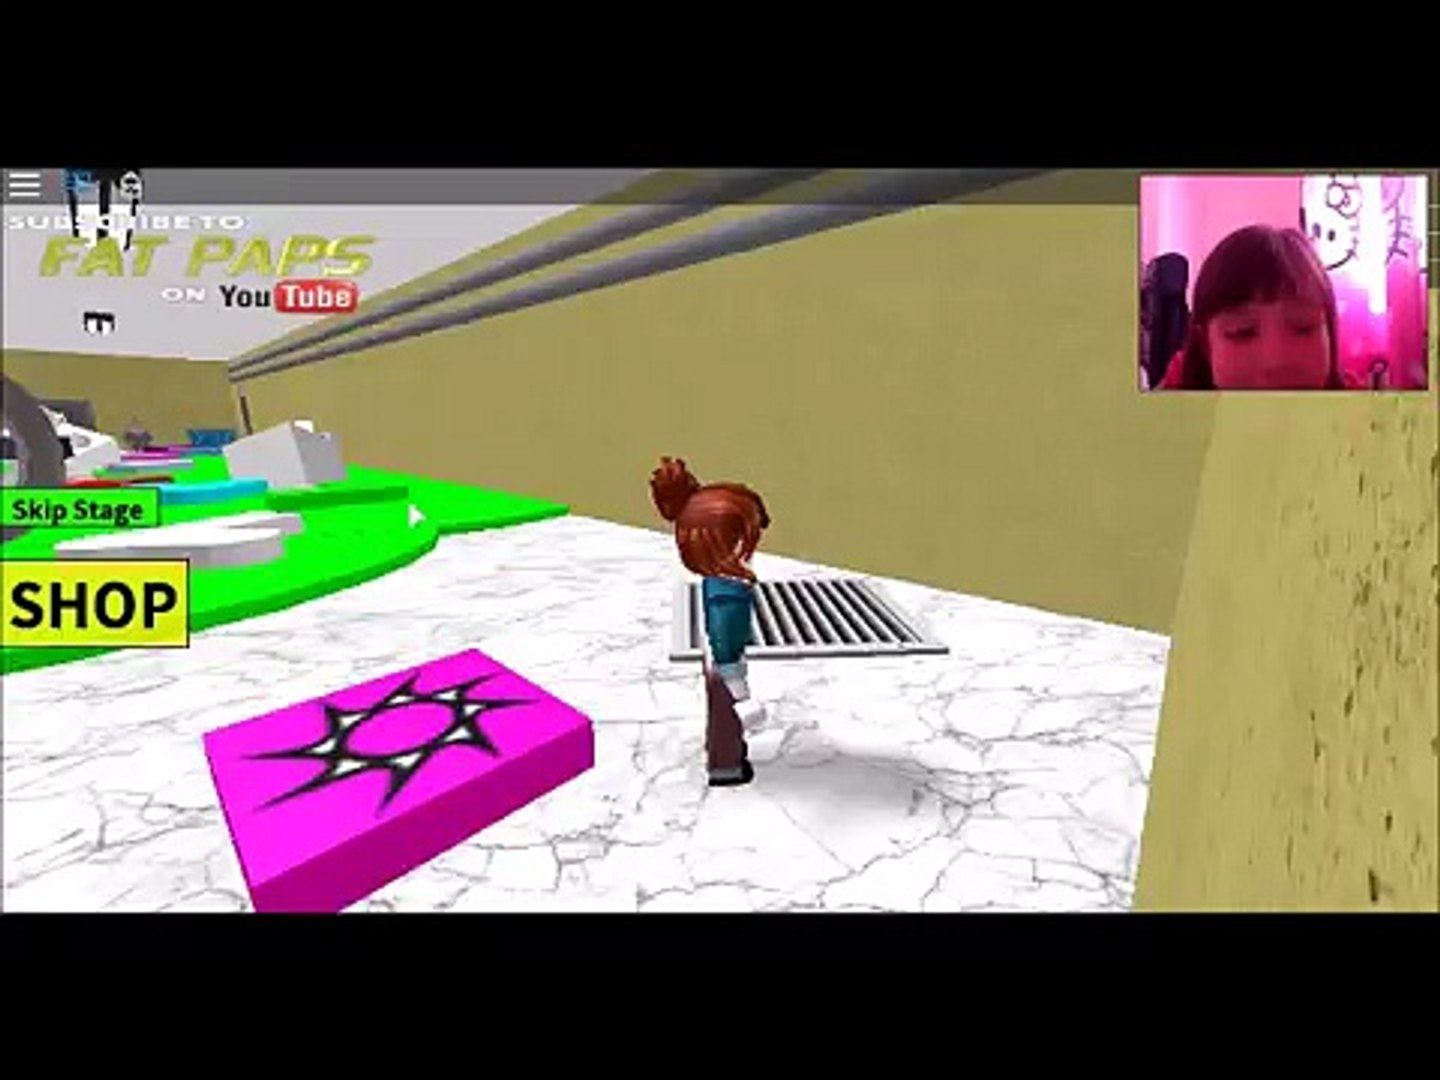 The Cute Diamond My First Roblox Obby Escape The Launderette - roblox gameplay 40 escape school obby math monster